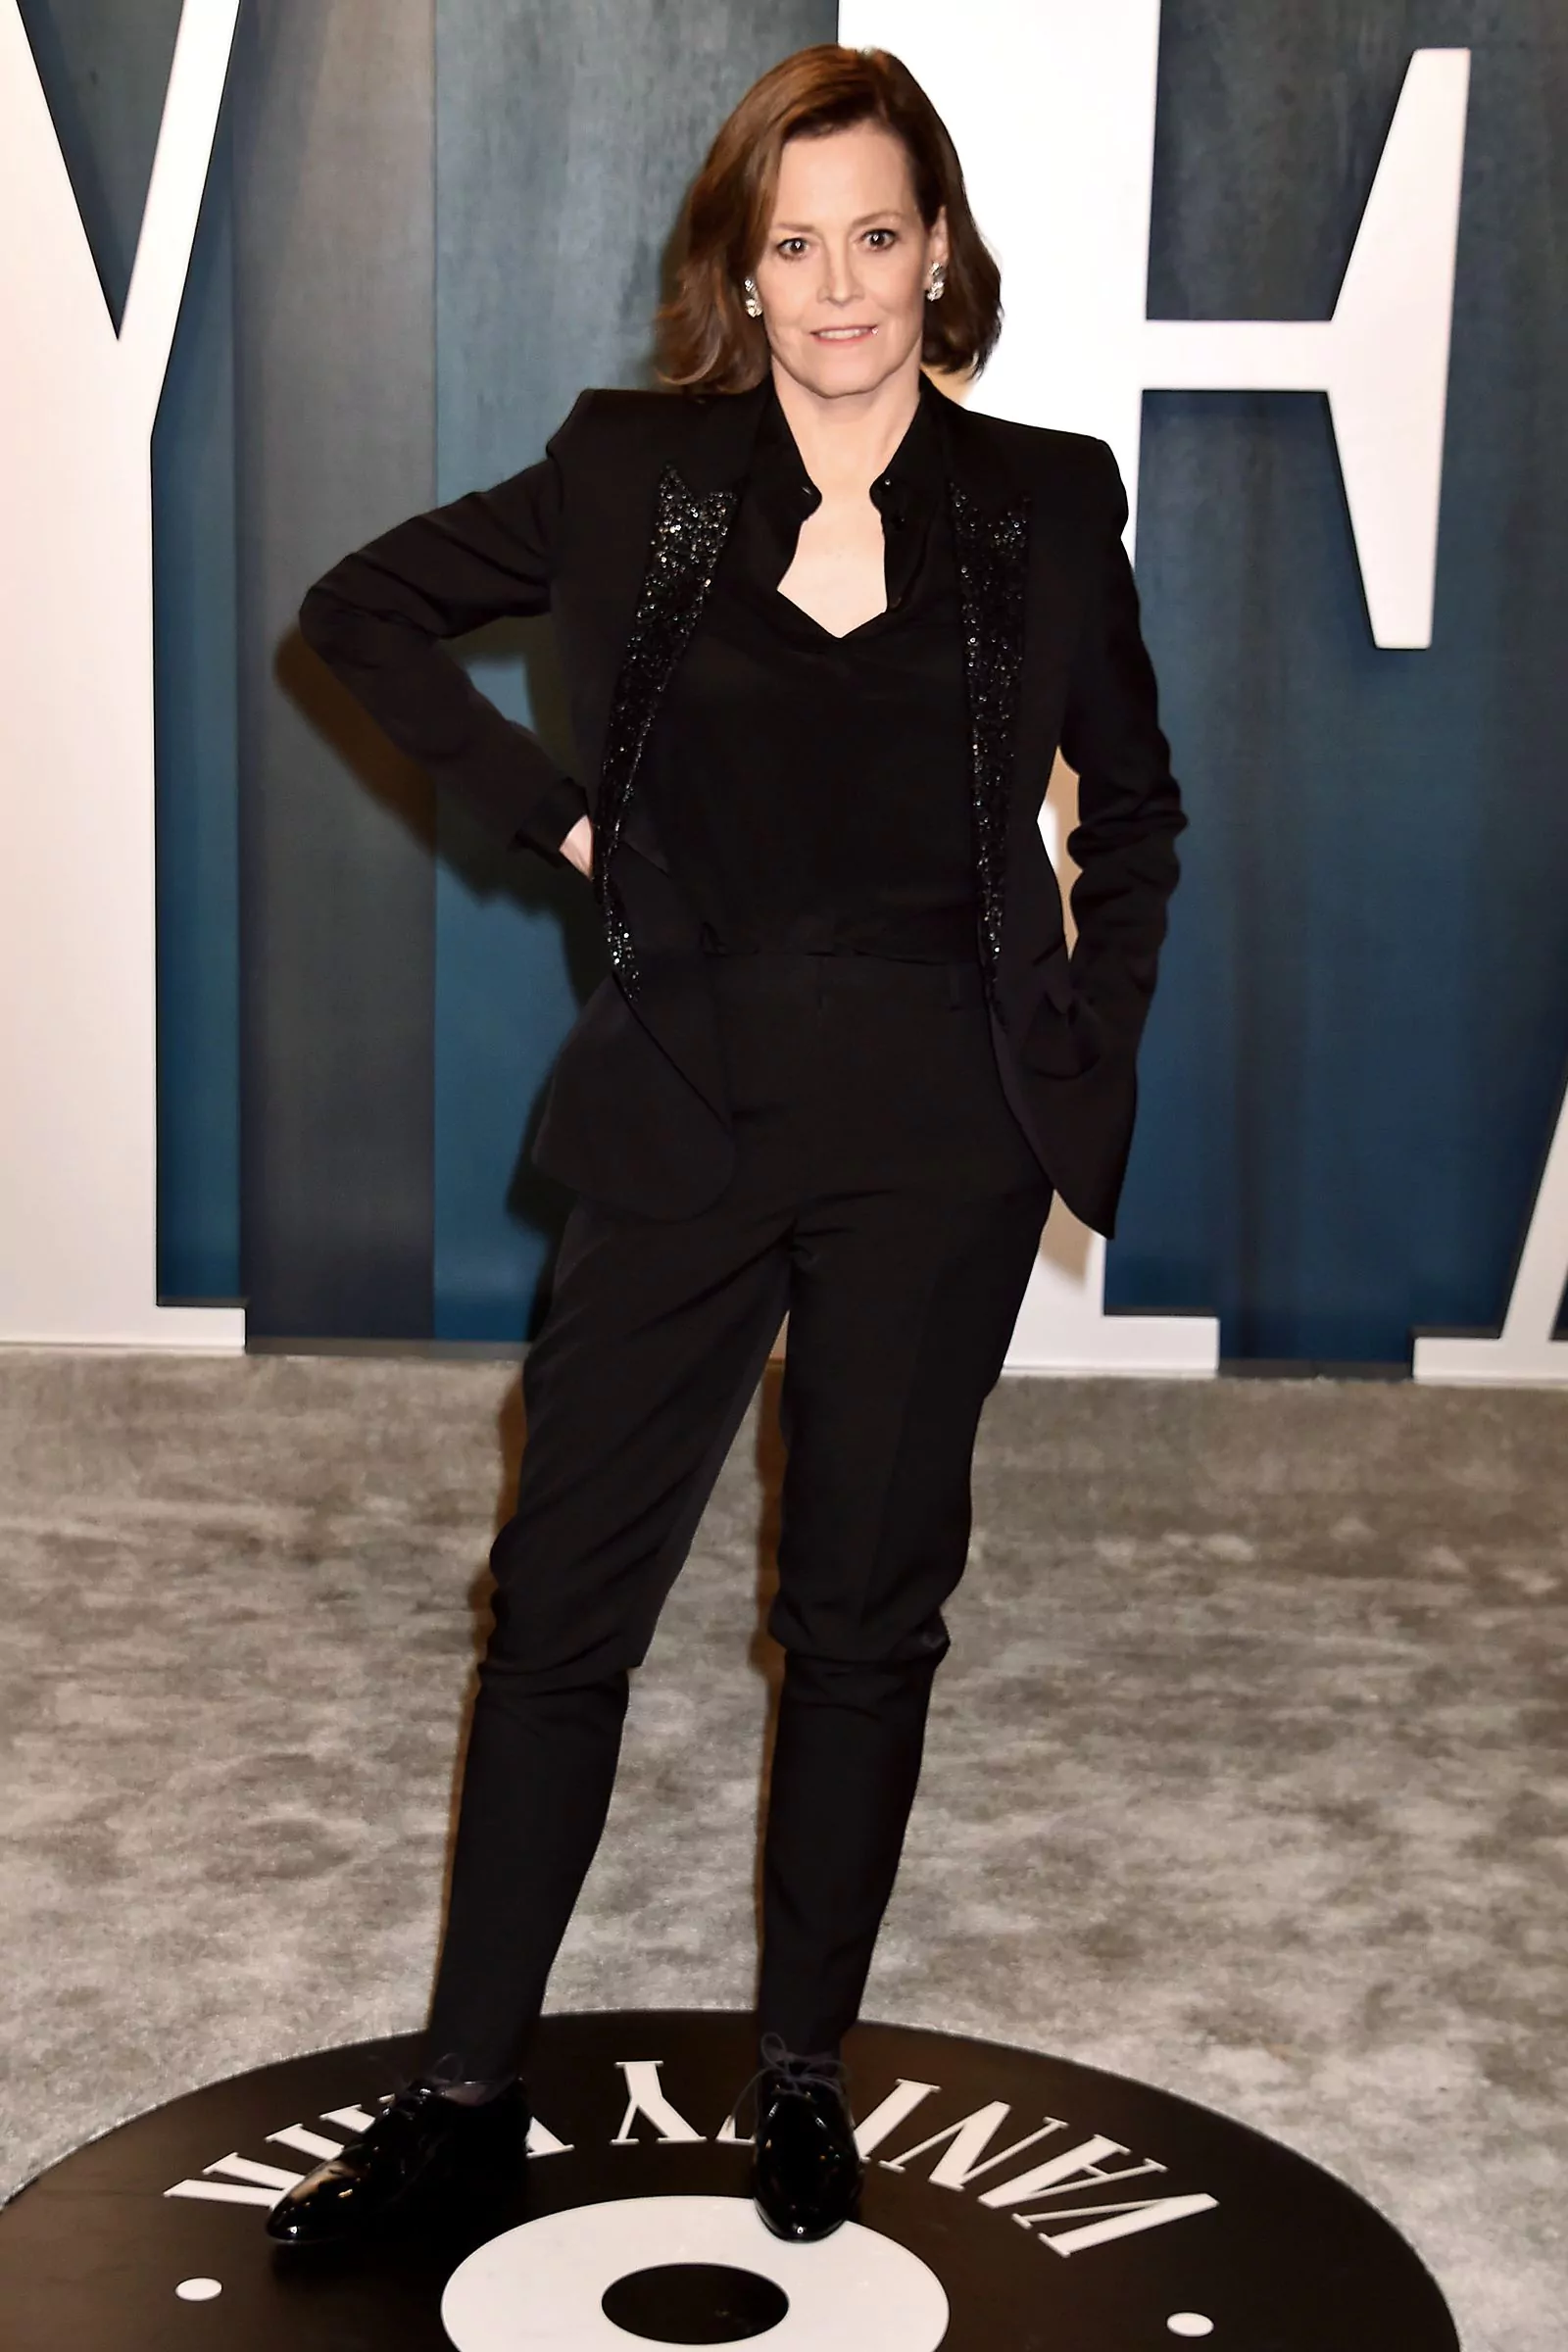 Sigourney Weaver at the Vanity Fair Oscar Party in Beverly Hills on February 9, 2020.